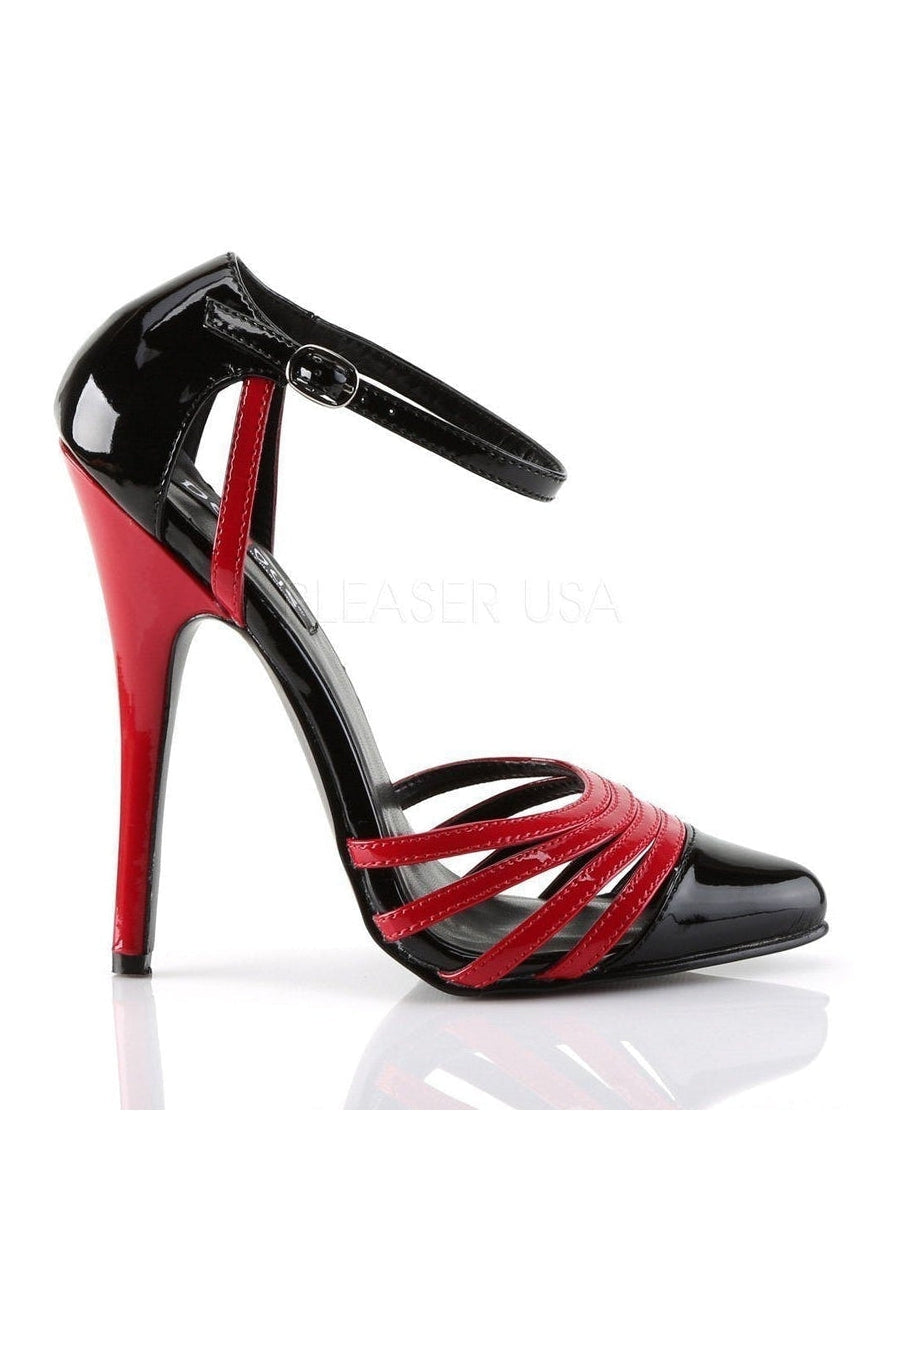 DOMINA-412 Pump | Black Patent-D'Orsays- Stripper Shoes at SEXYSHOES.COM